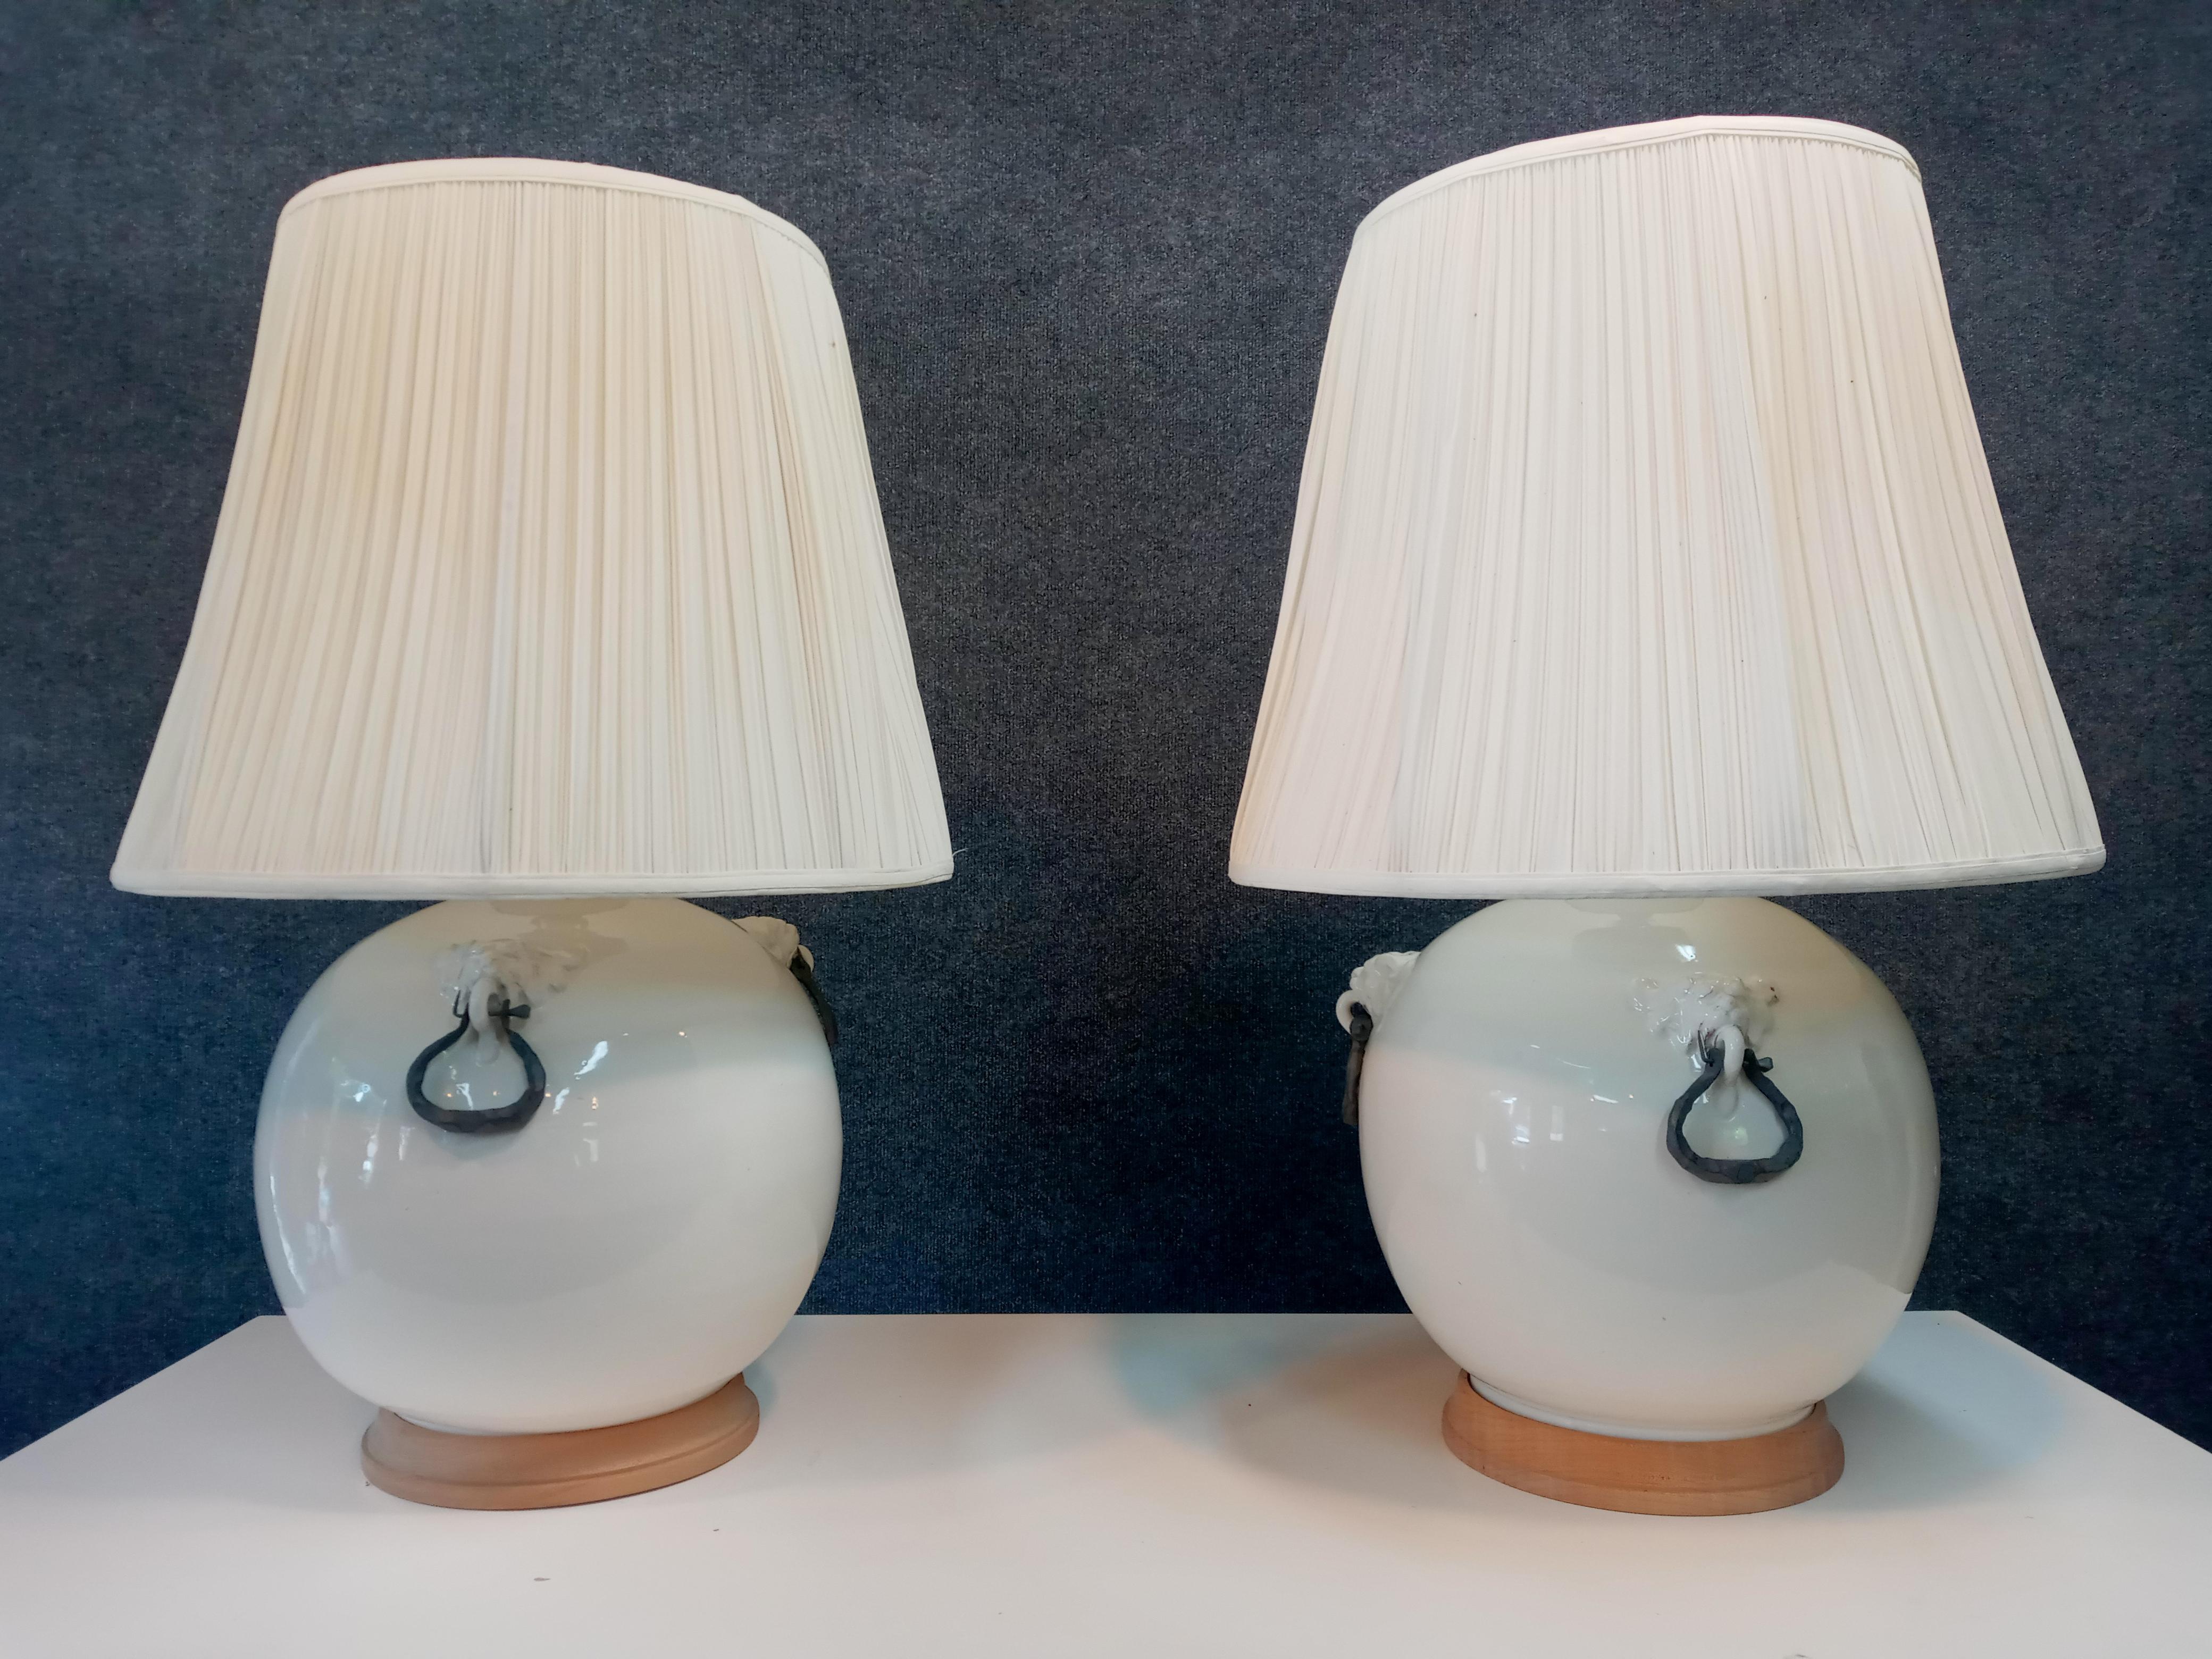 Pair of very large vintage table lamps. Glazed ceramic bodies have metal mounts, a turned wood foot, single brass socket, and original linen shades. 